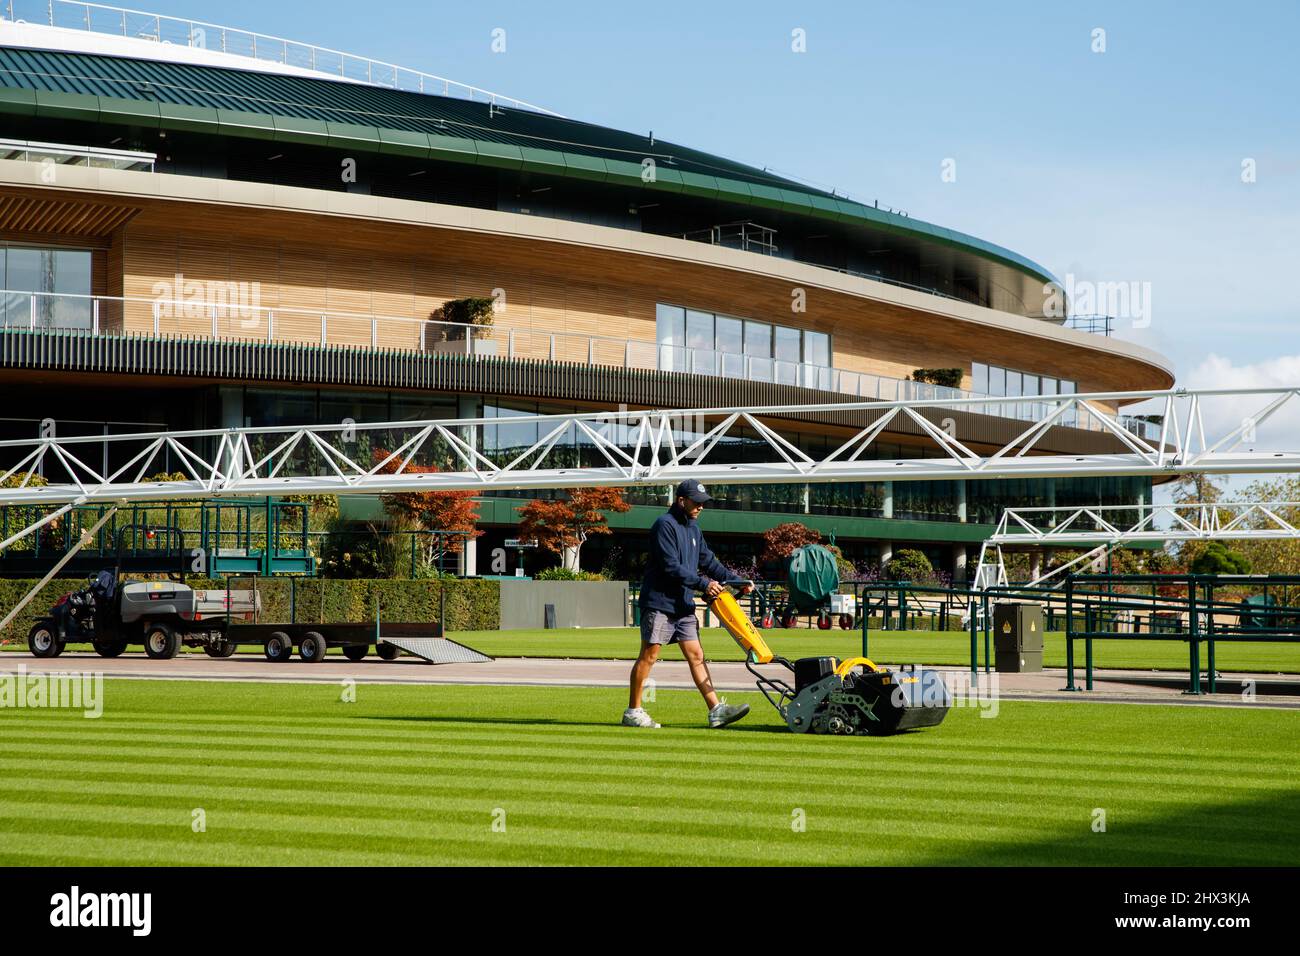 Groundman cuts the grass in front of the No.1 Court at The All England Lawn Tennis Club, home to The Wimbledon Championships Stock Photo